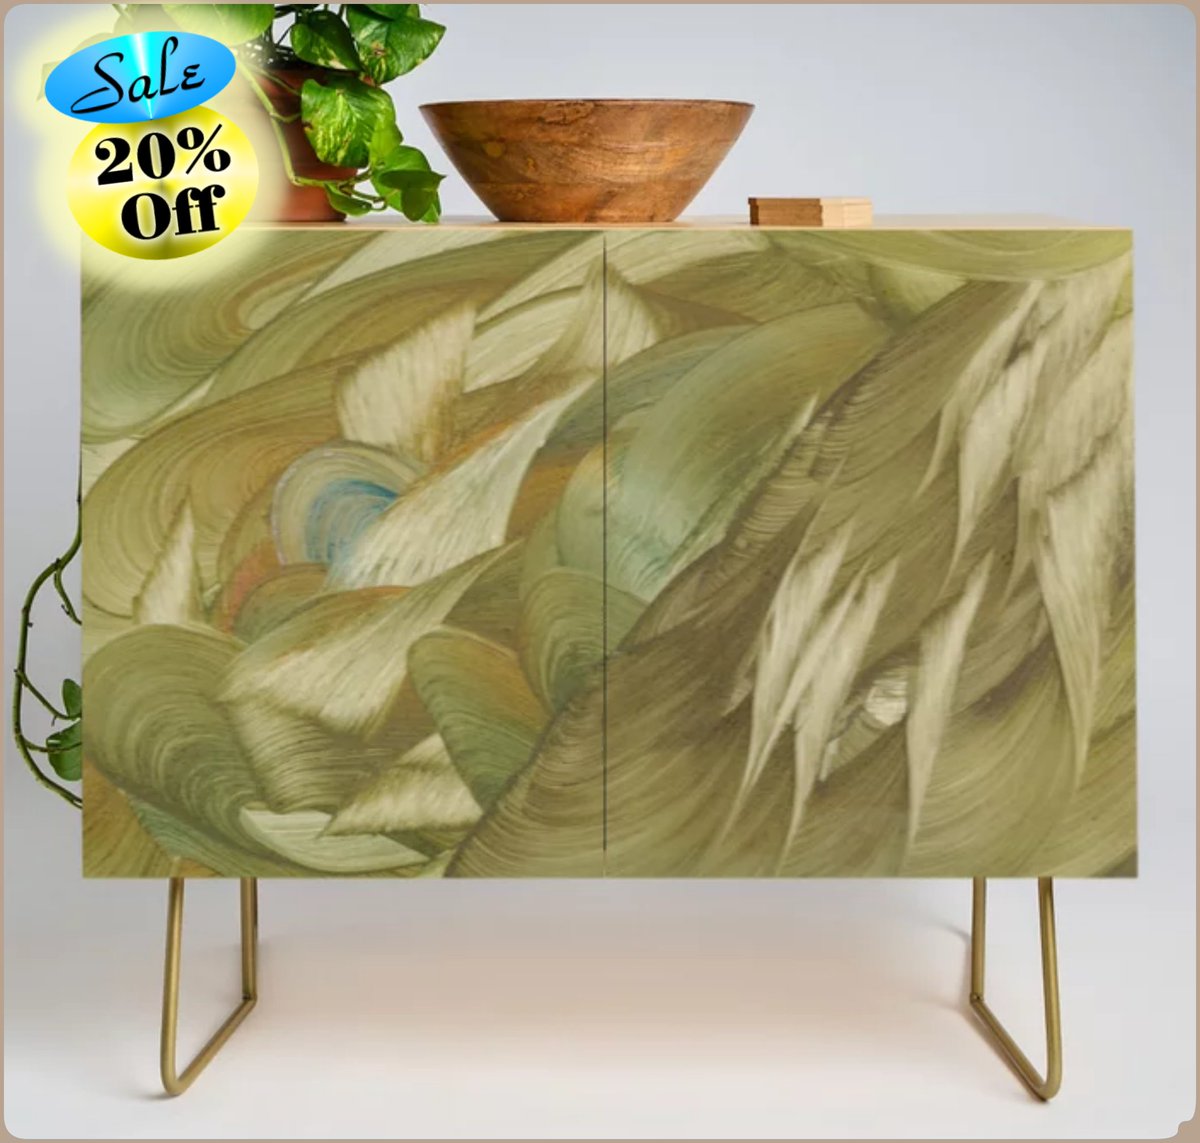 *SALE 20% Off*
Zababa Credenza~by Art Falaxy~
~Unique Home Decor~
#artfalaxy #art #furniture #tables #homedecor #society6 #modern #accents #interior #trendy #credenza #dressers #stools #coffee

society6.com/product/sevent…
COLLECTION: society6.com/art/seventeent…